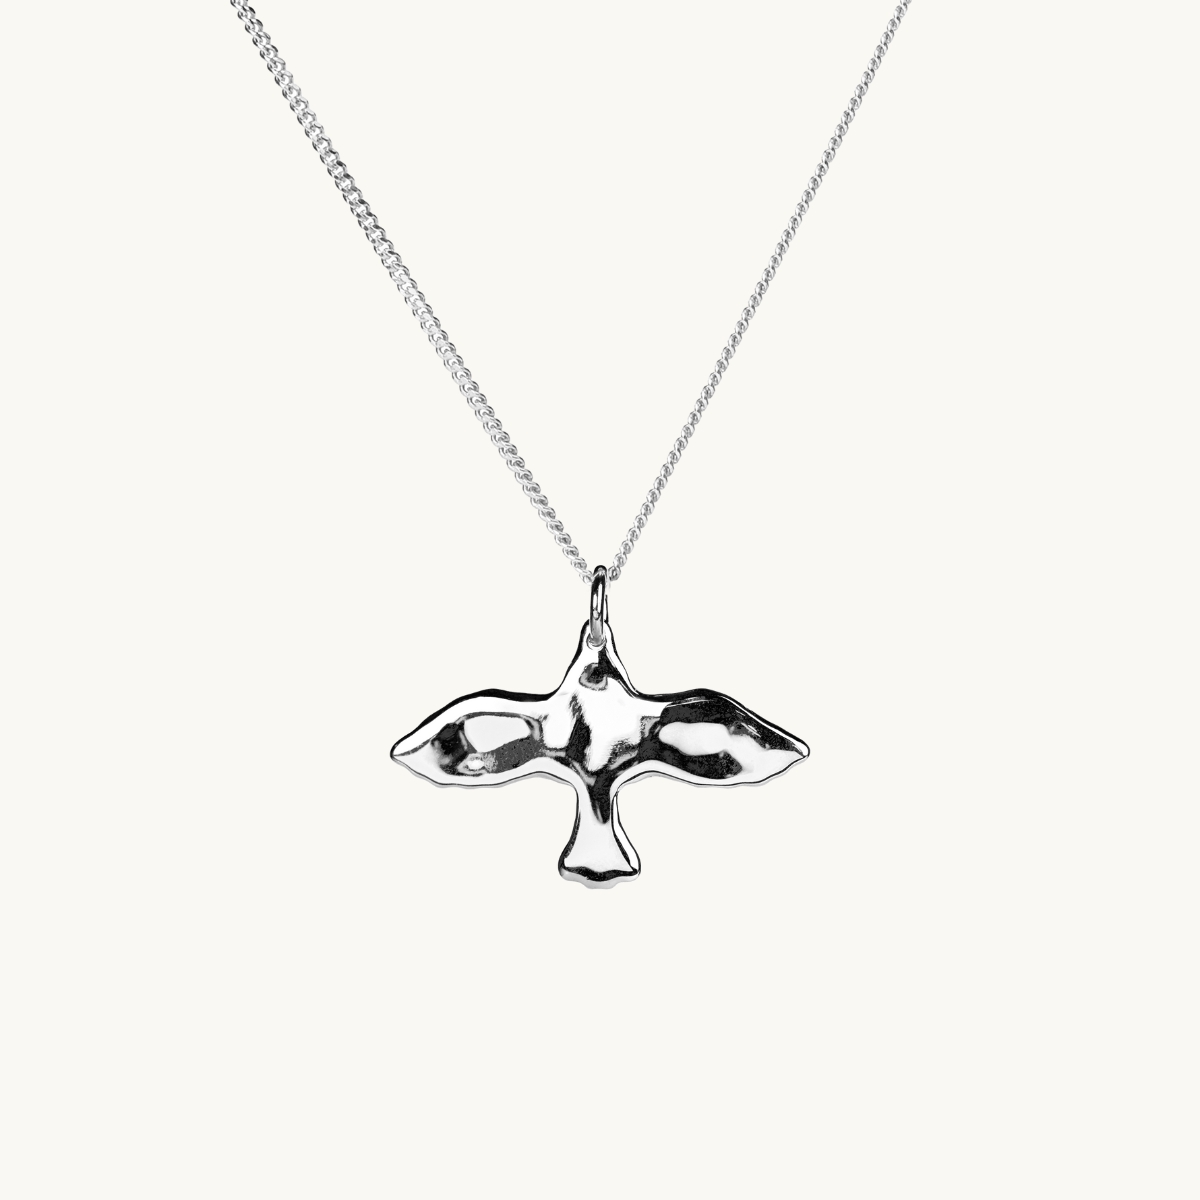 An uneven dove in sterling silver 